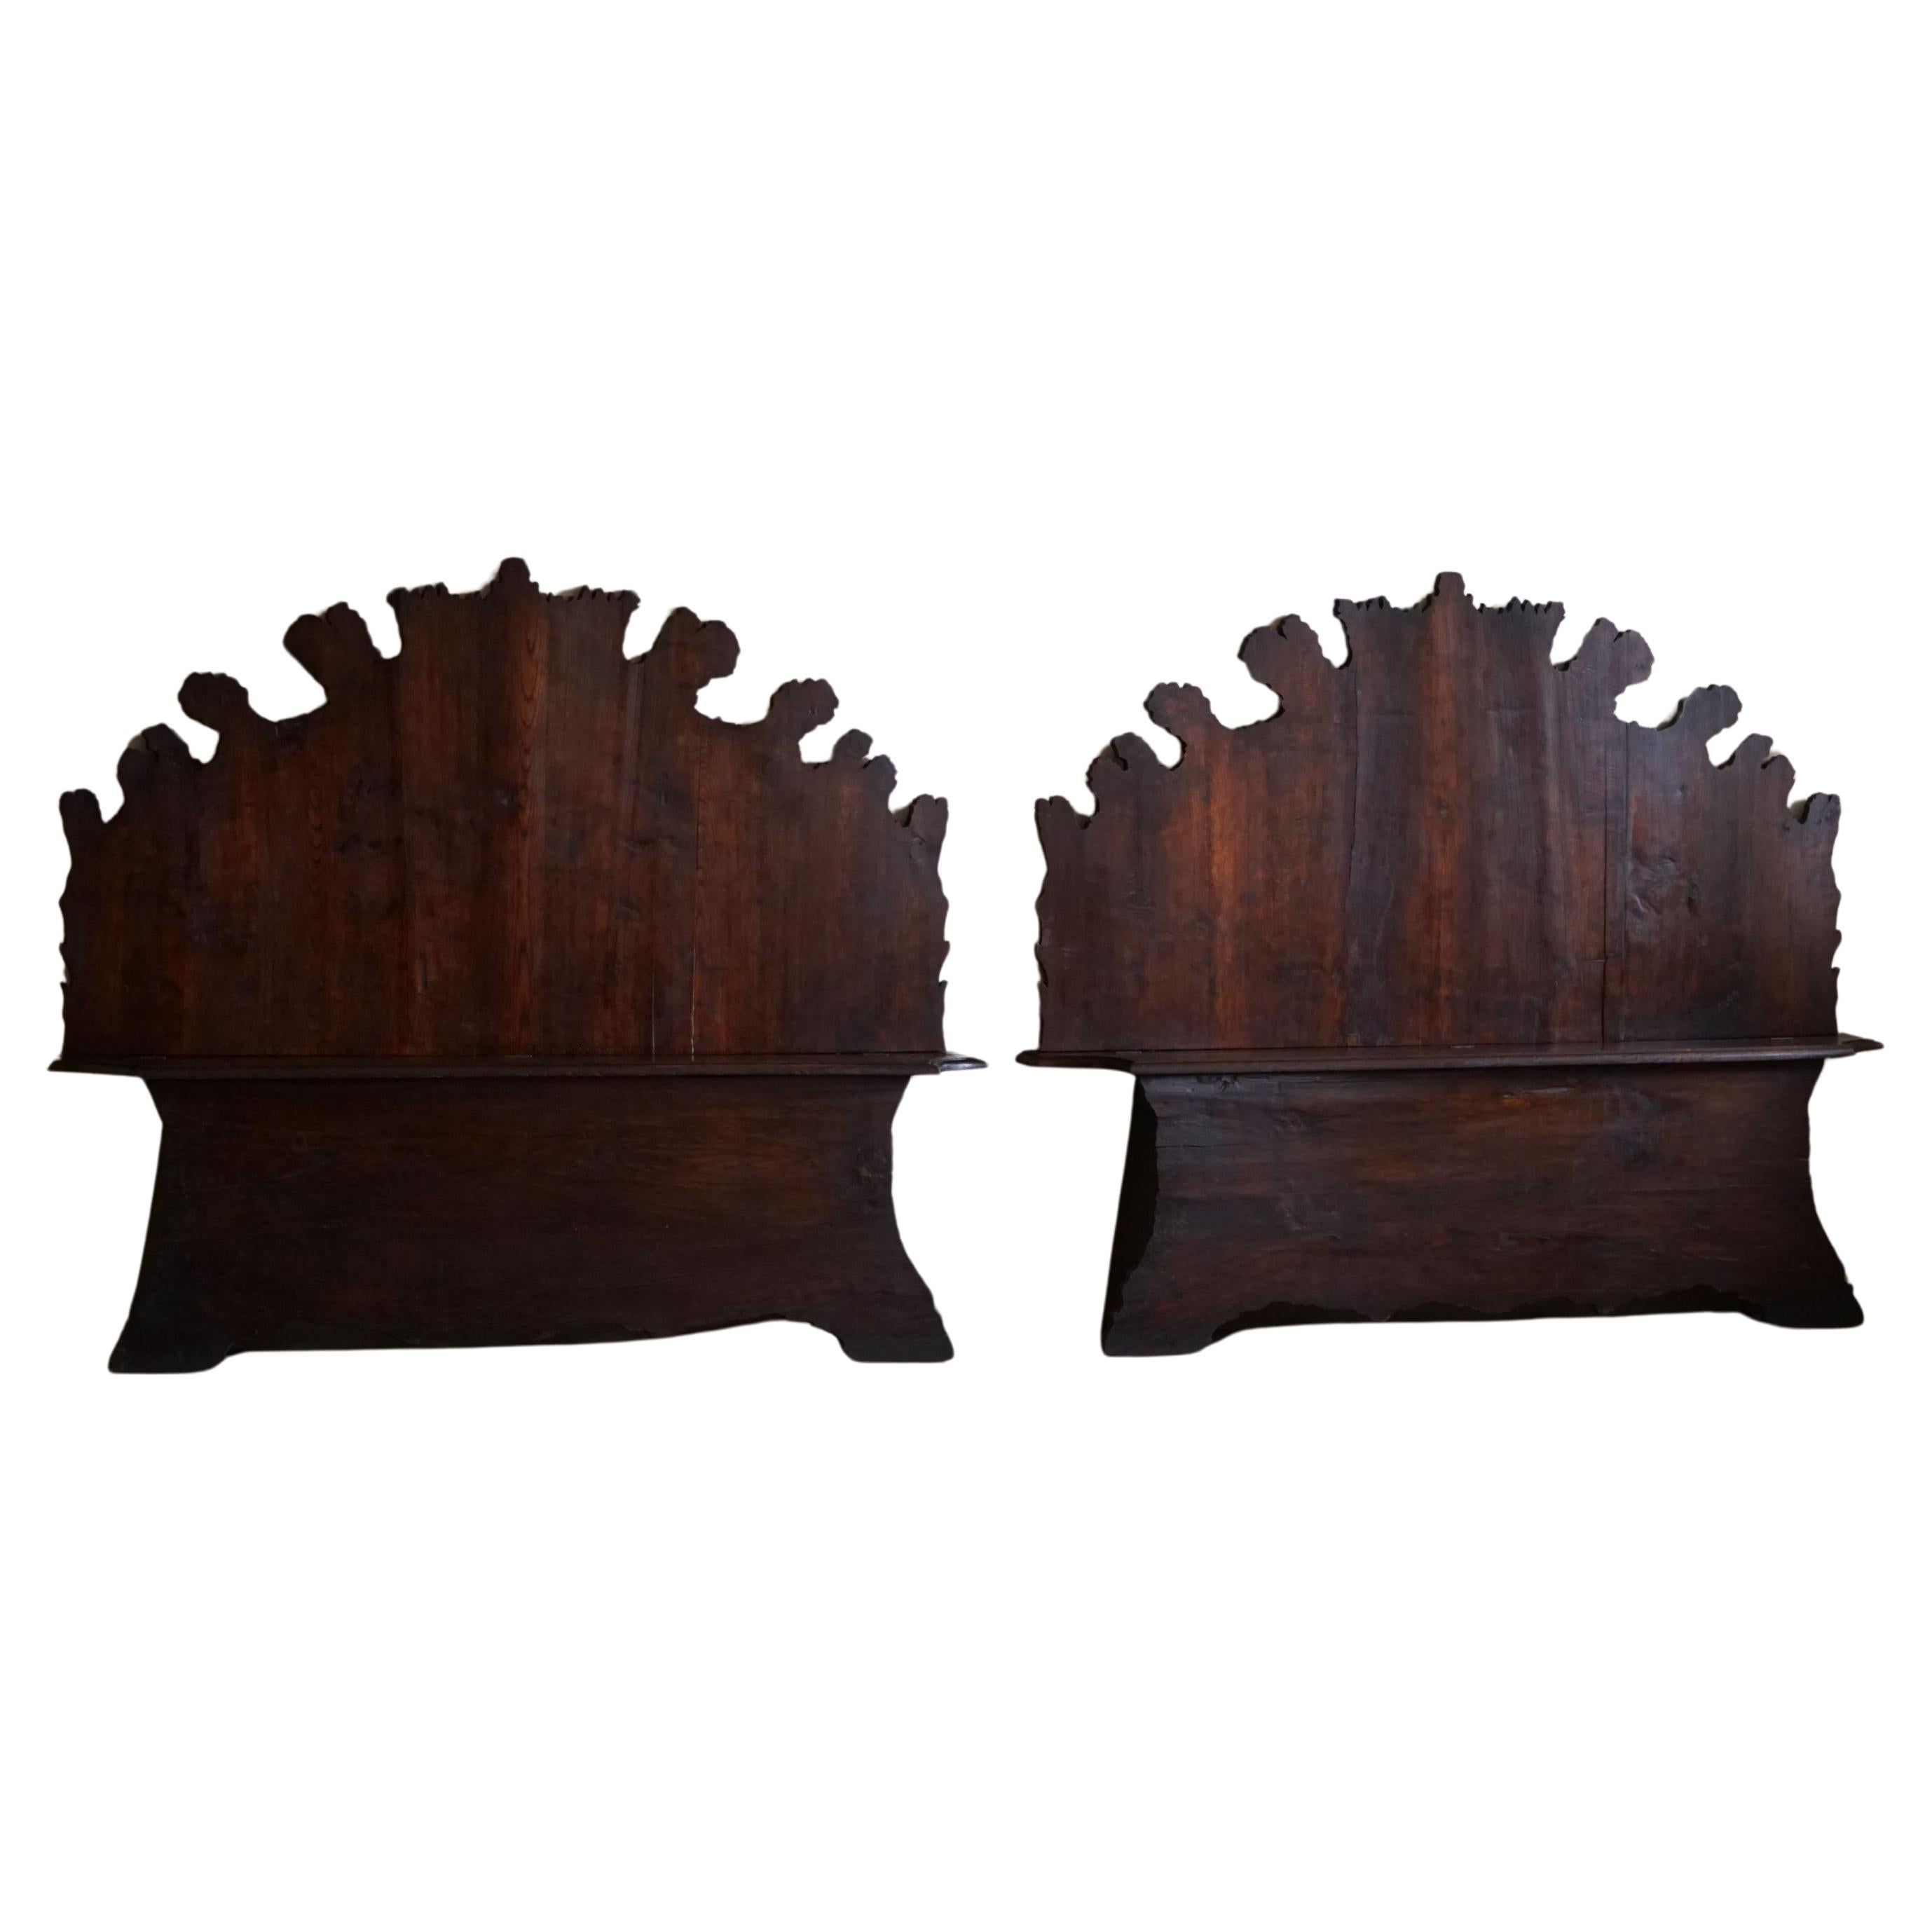 Antique Italian Hall Settle Bench, Villa Bianca, Naples, Early 19th Century For Sale